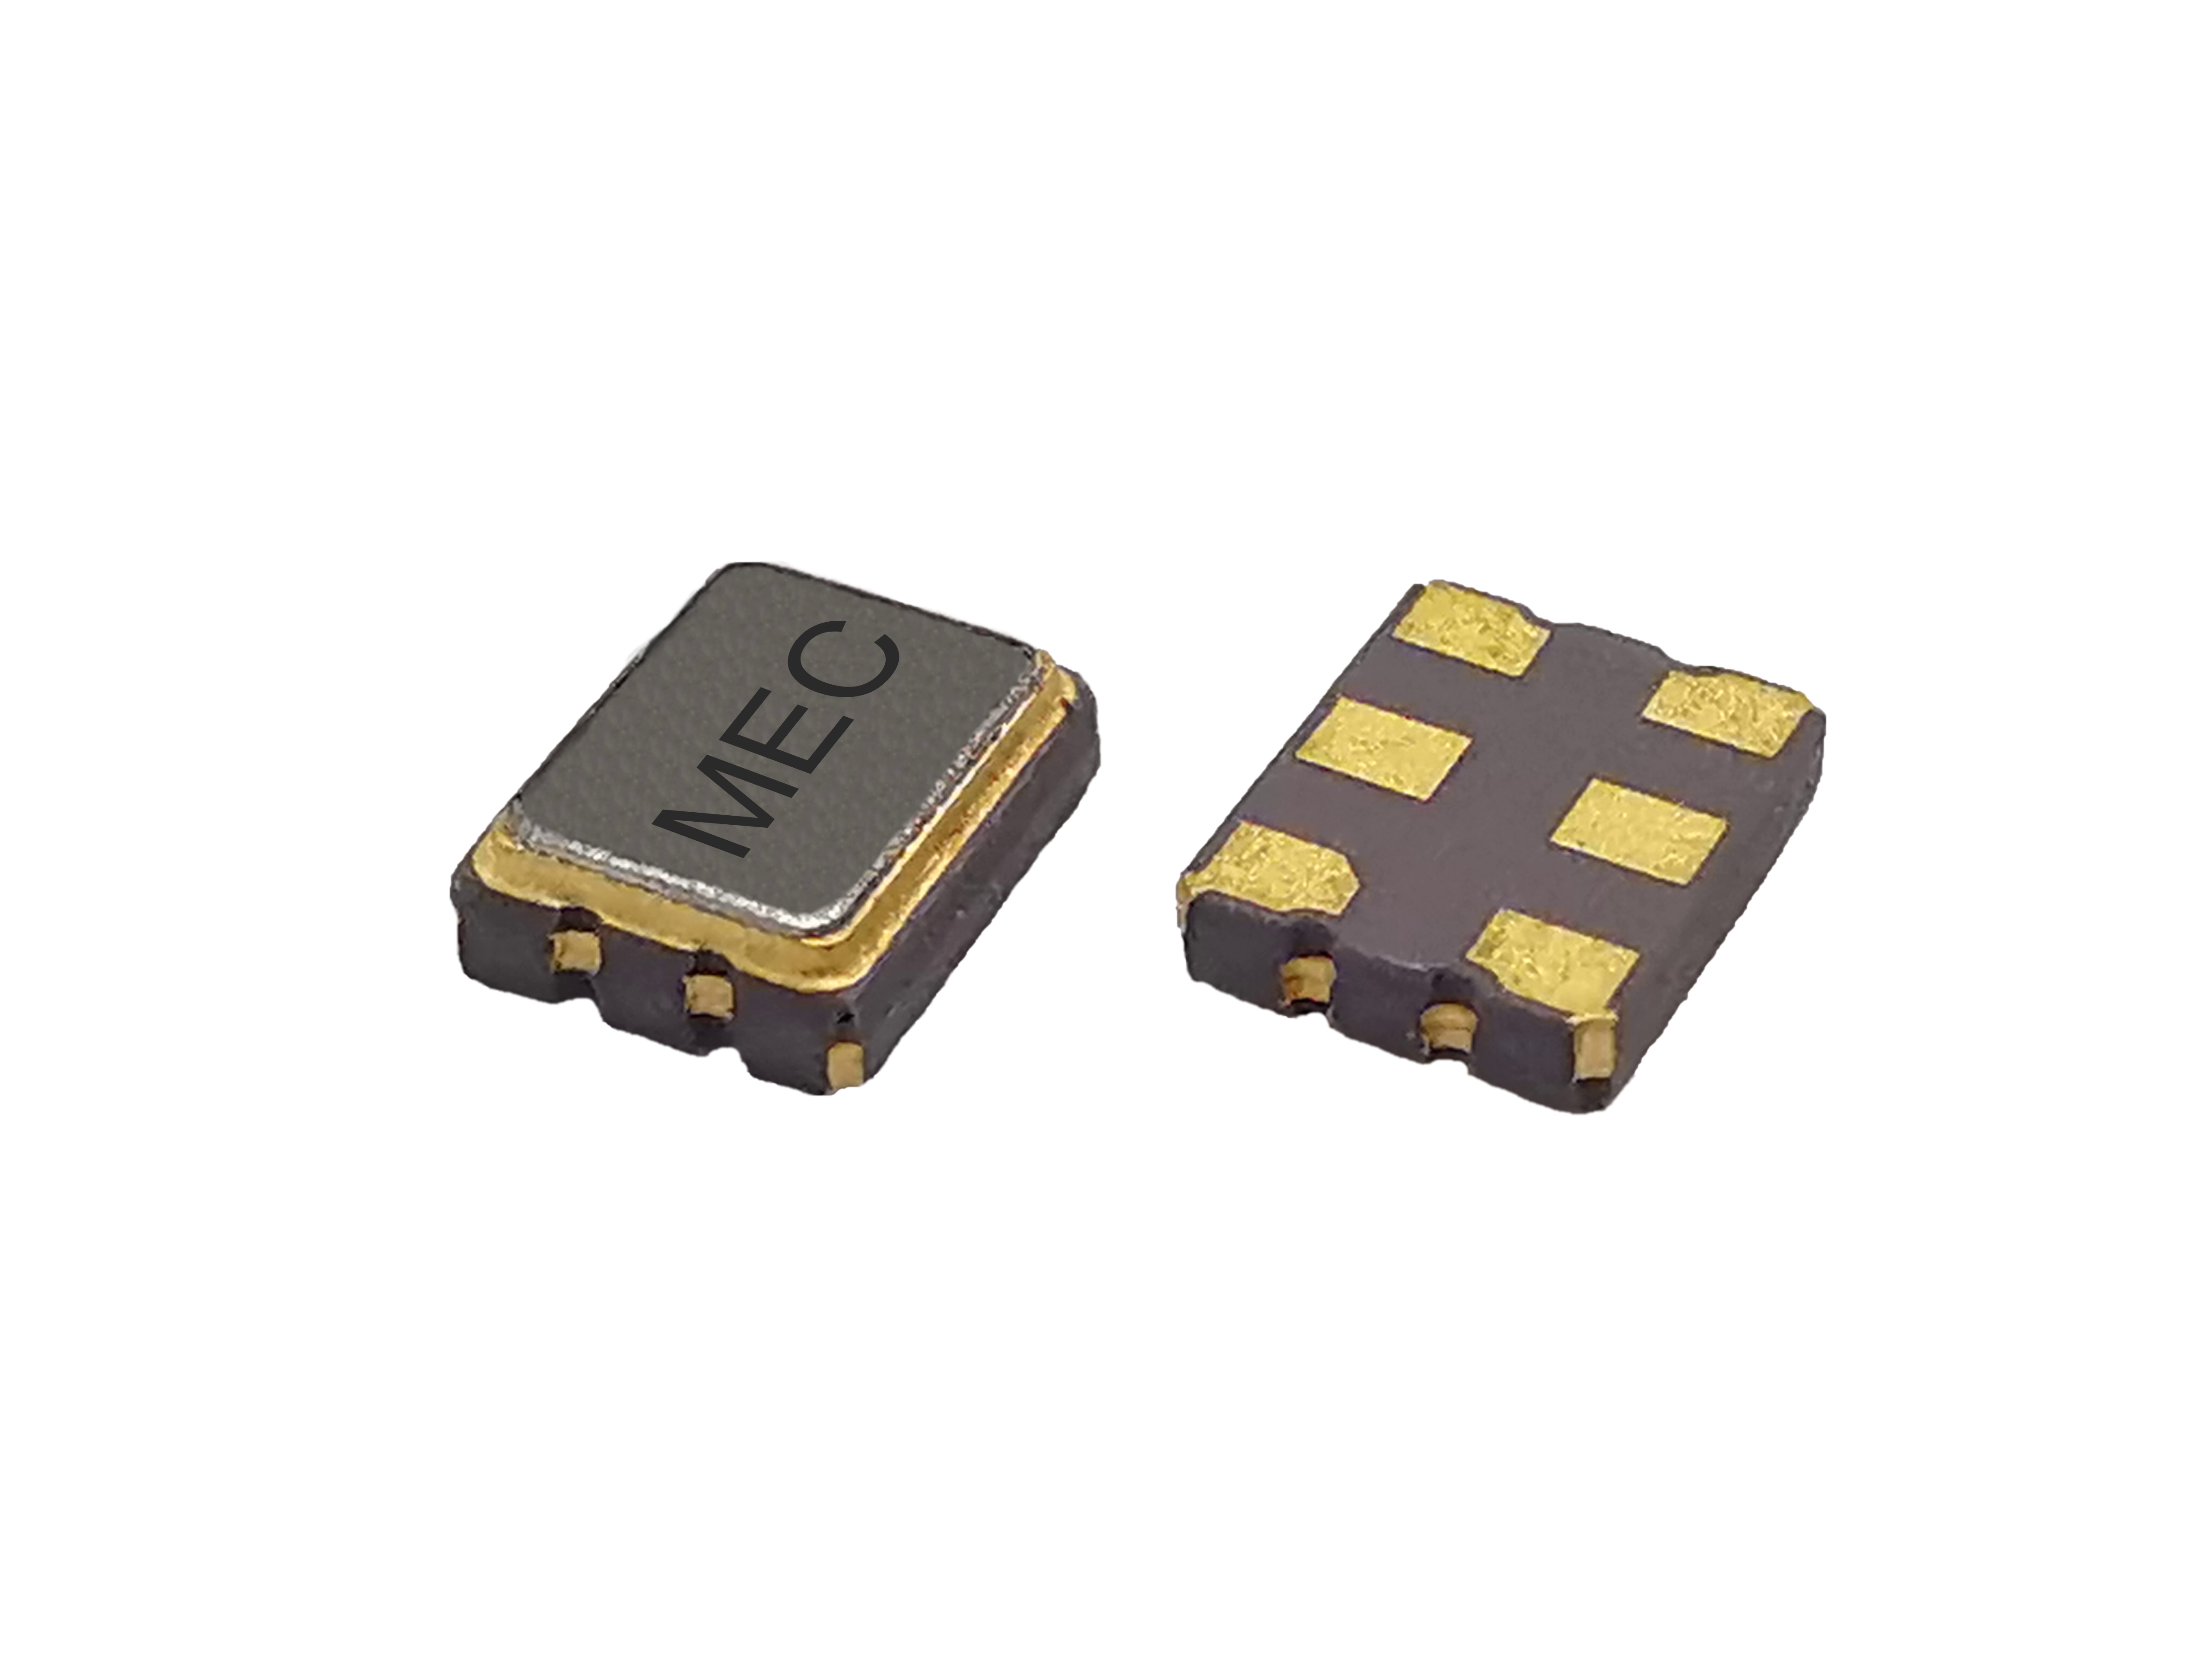 HPEK326 3225 3.3V Superb Phase Noise Differential With No PLL LVPECL SMD Crystal Oscillator